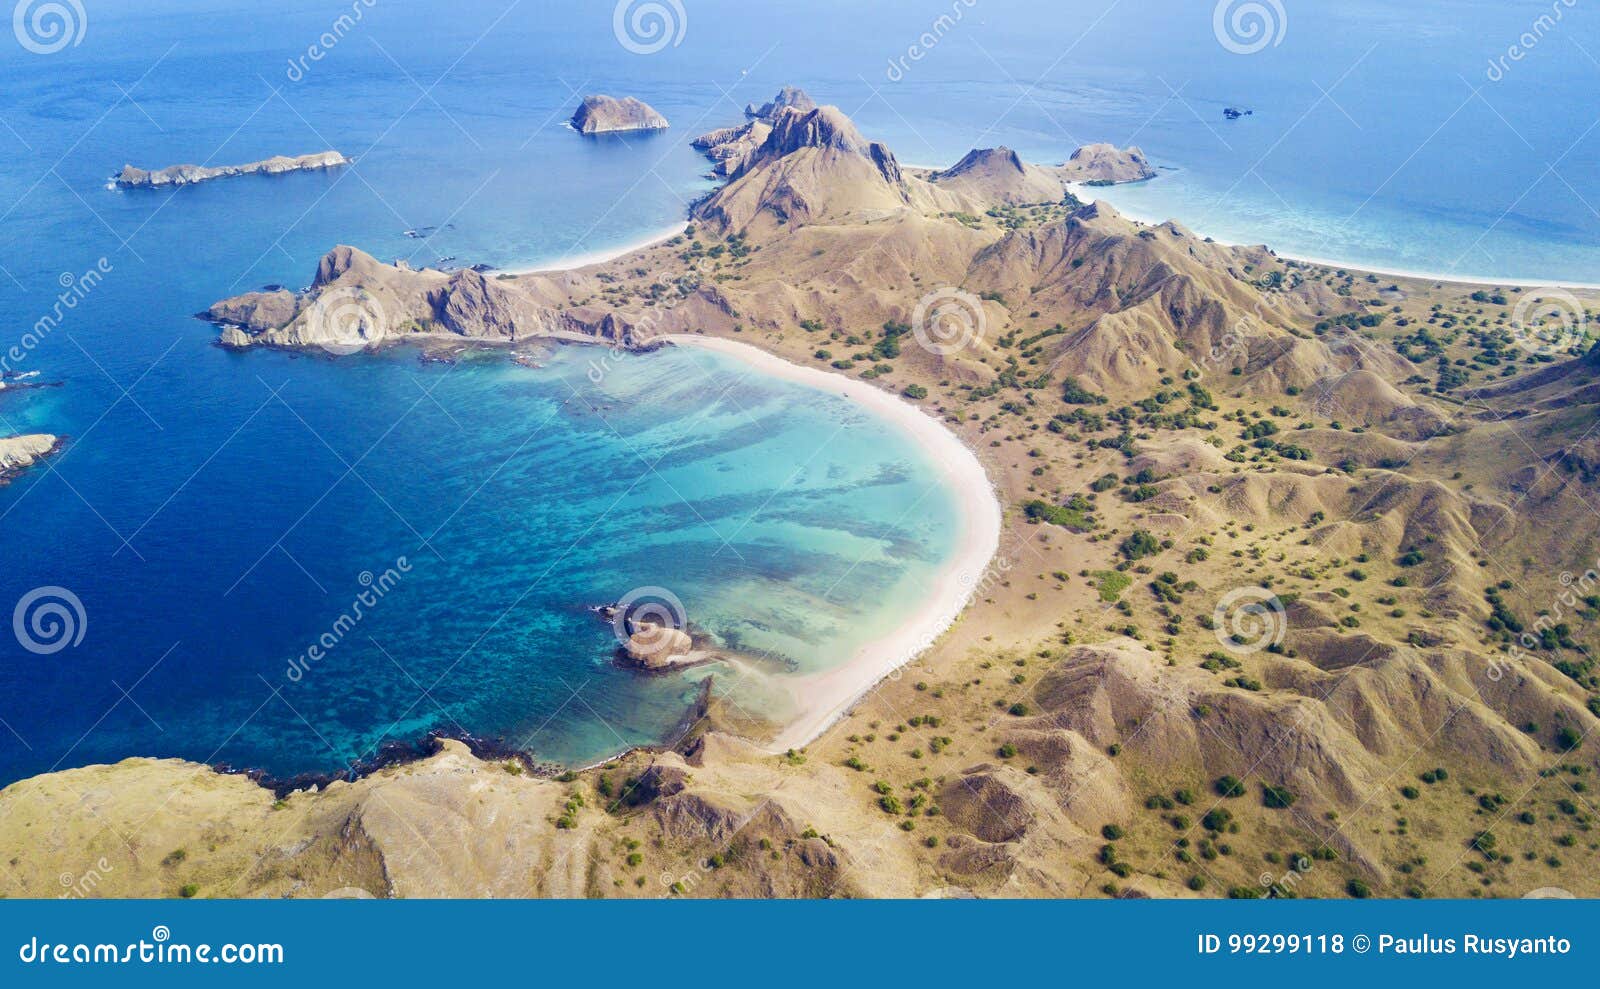 padar island with turquoise water